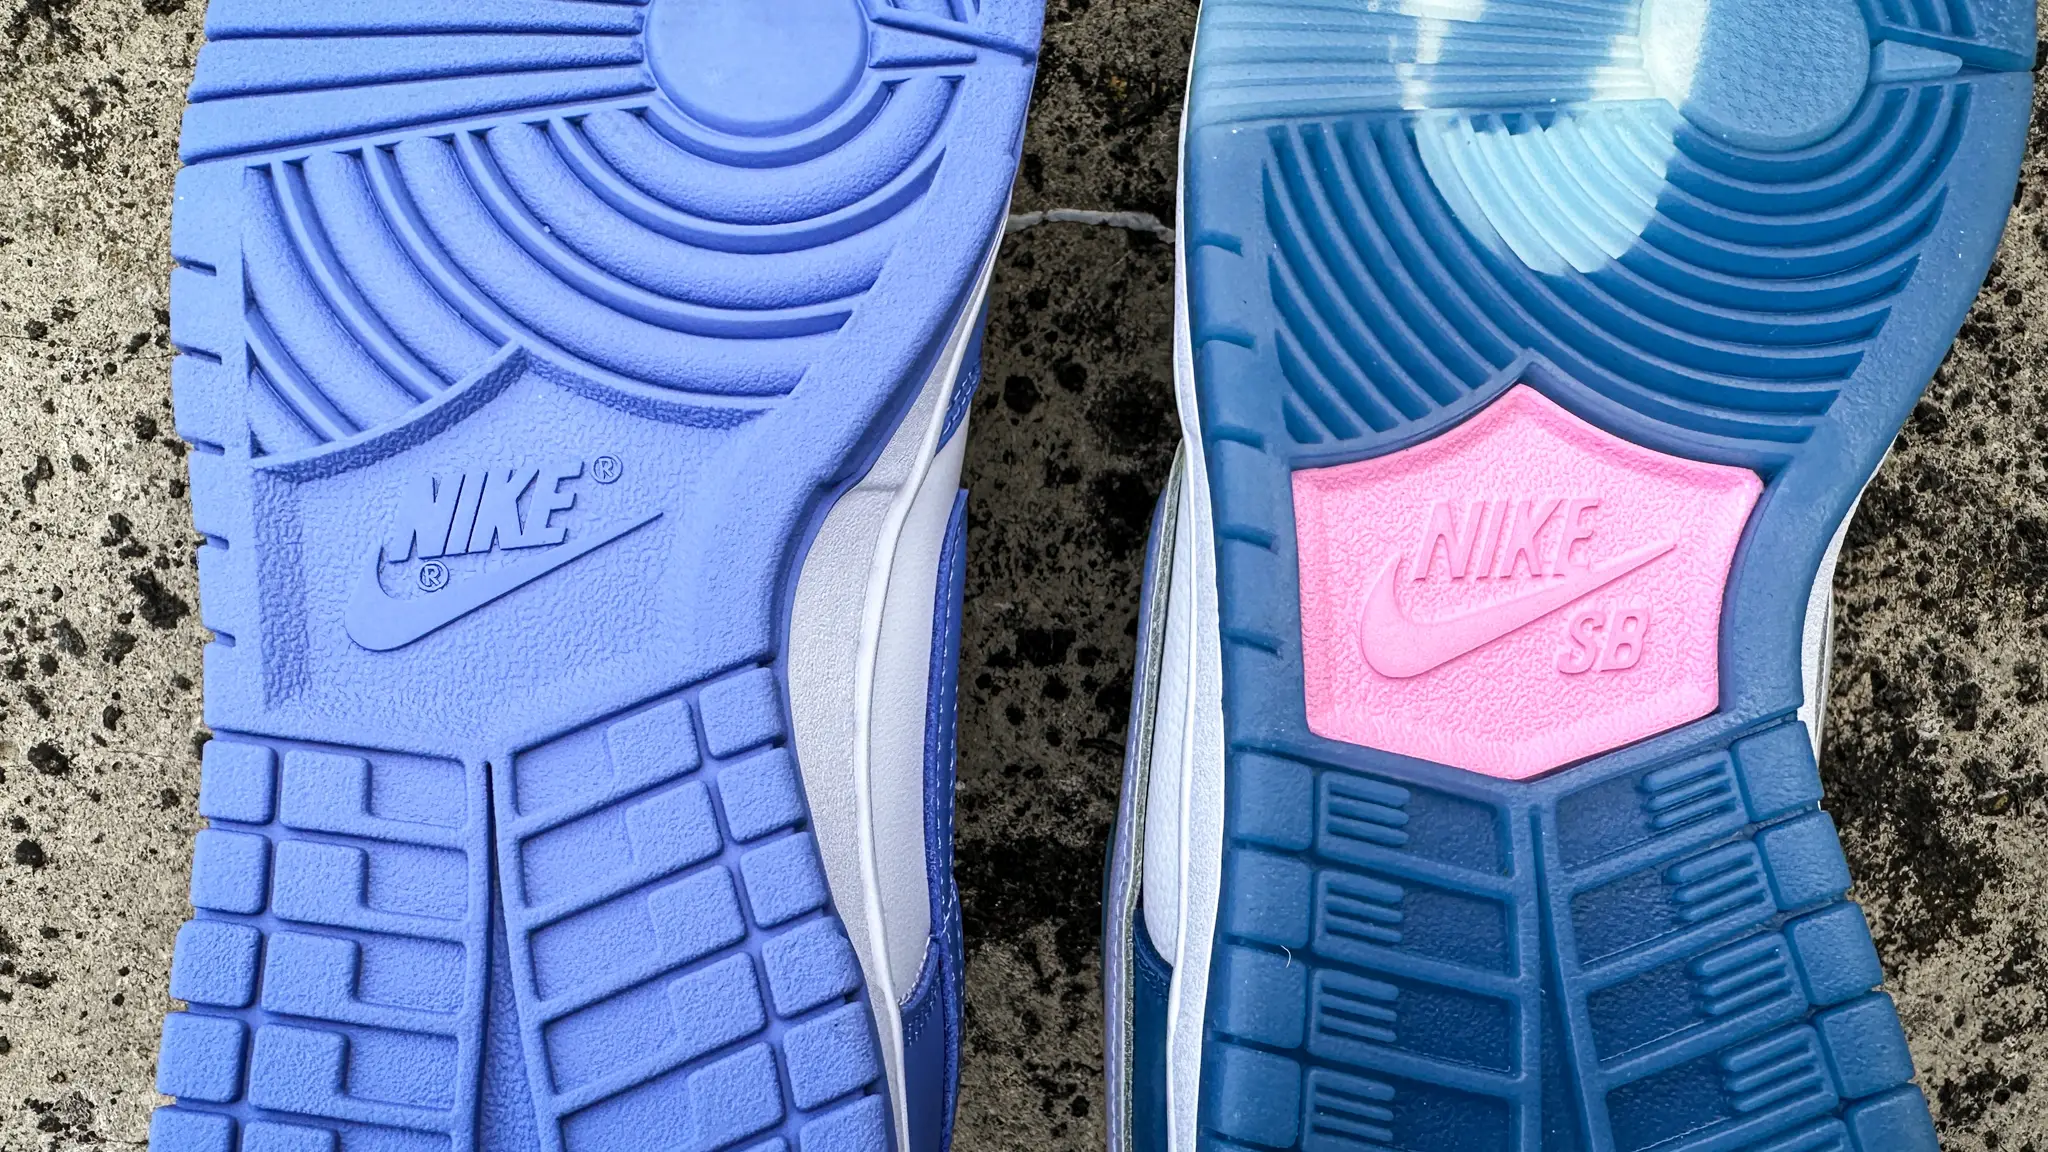 These Nike KD IV "Wanda Pratt" are a special pair of KD Dunk Low: What's the Difference?